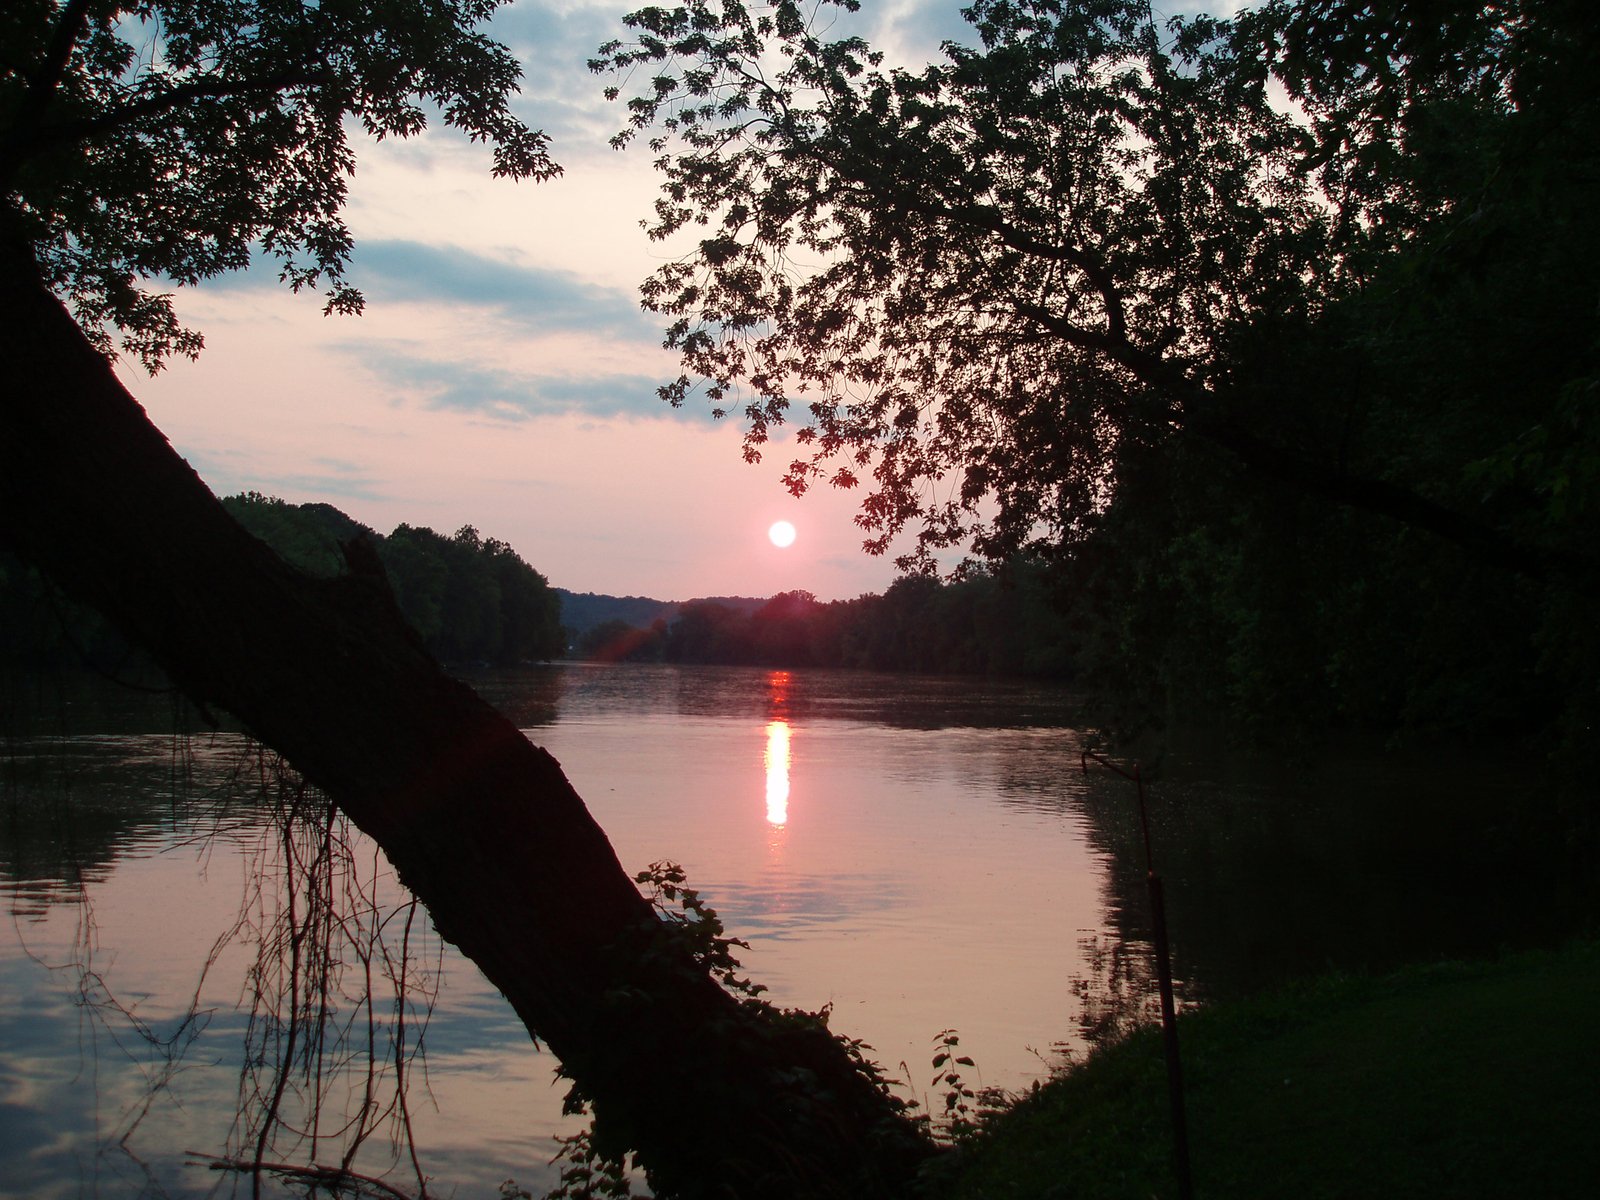 the sun setting over a river in the forest